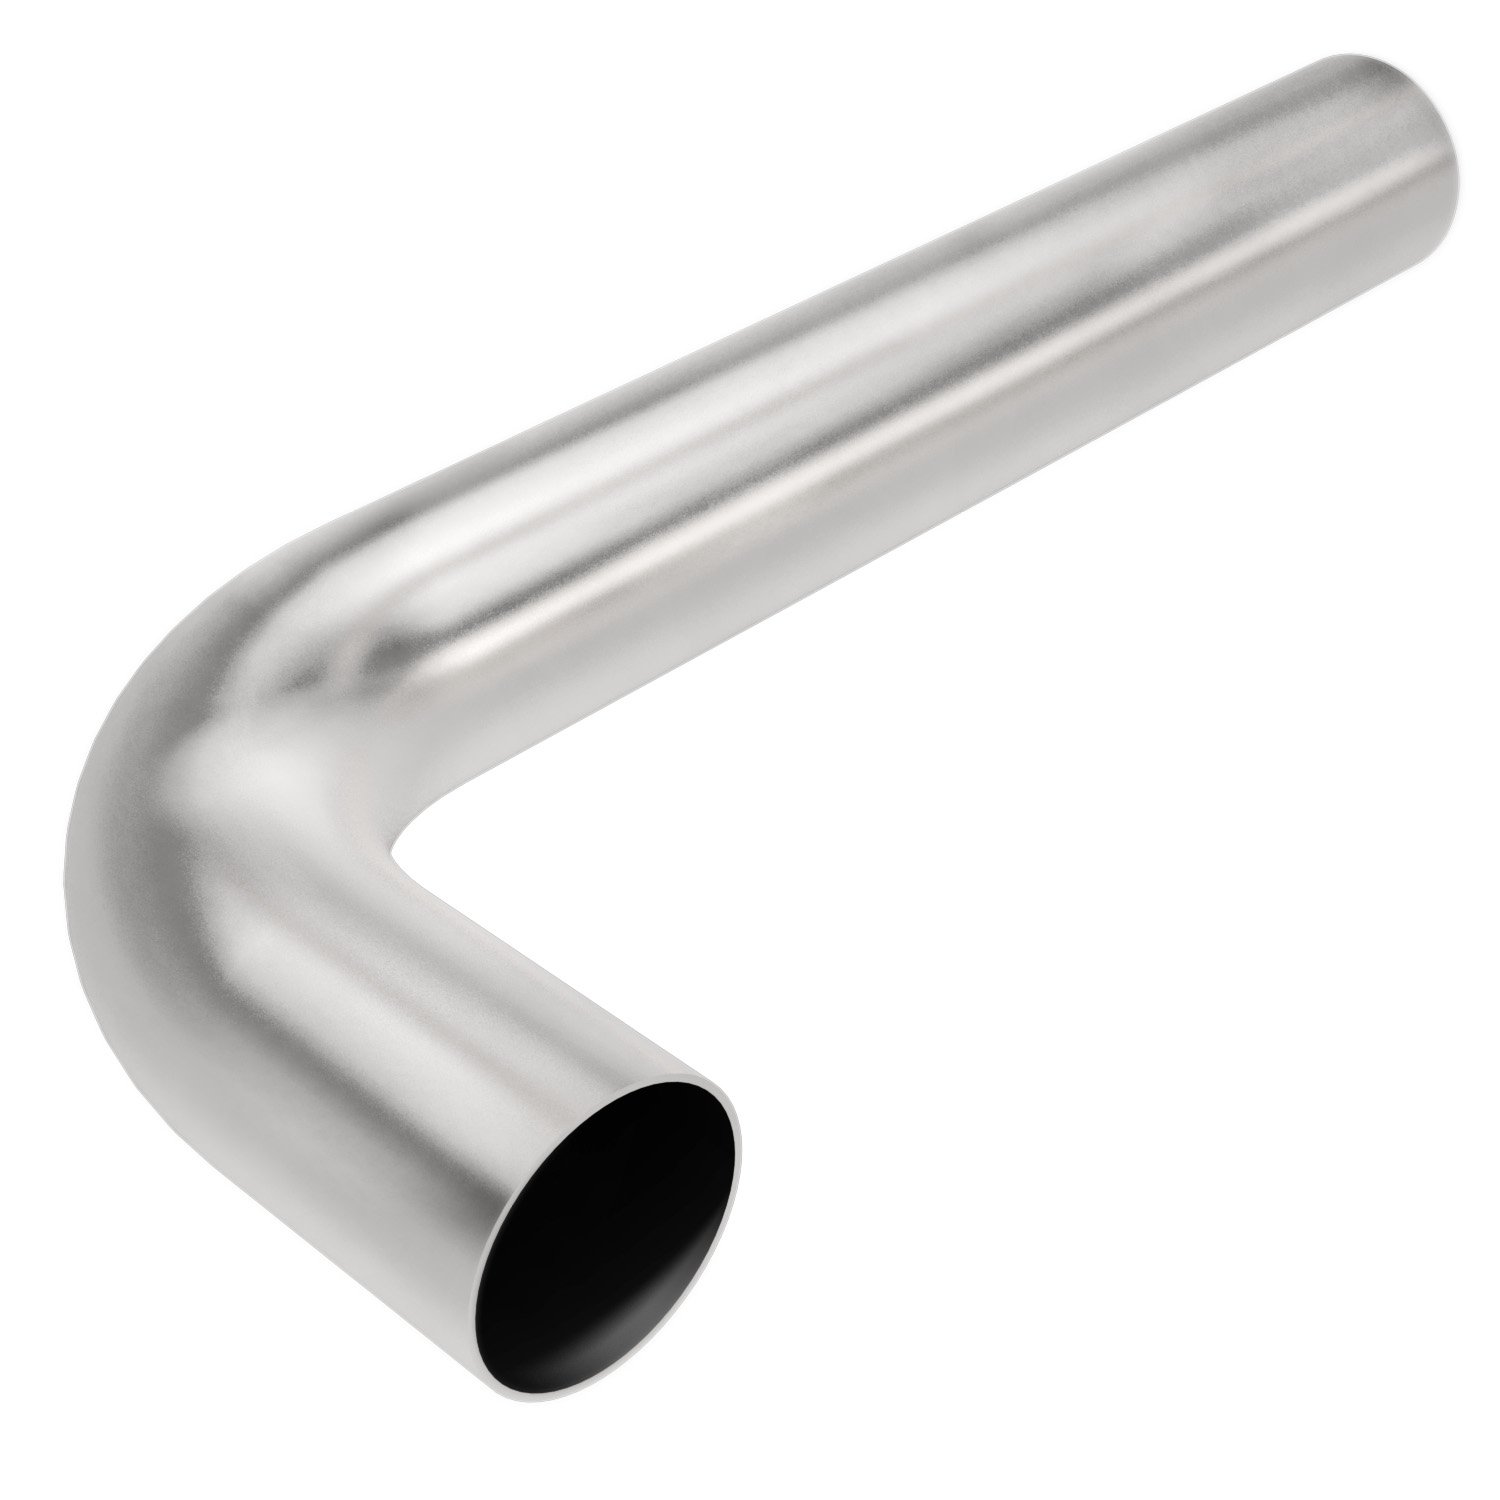 Stainless Steel 90° Transition Exhaust Pipes Outside Diameter: 3"